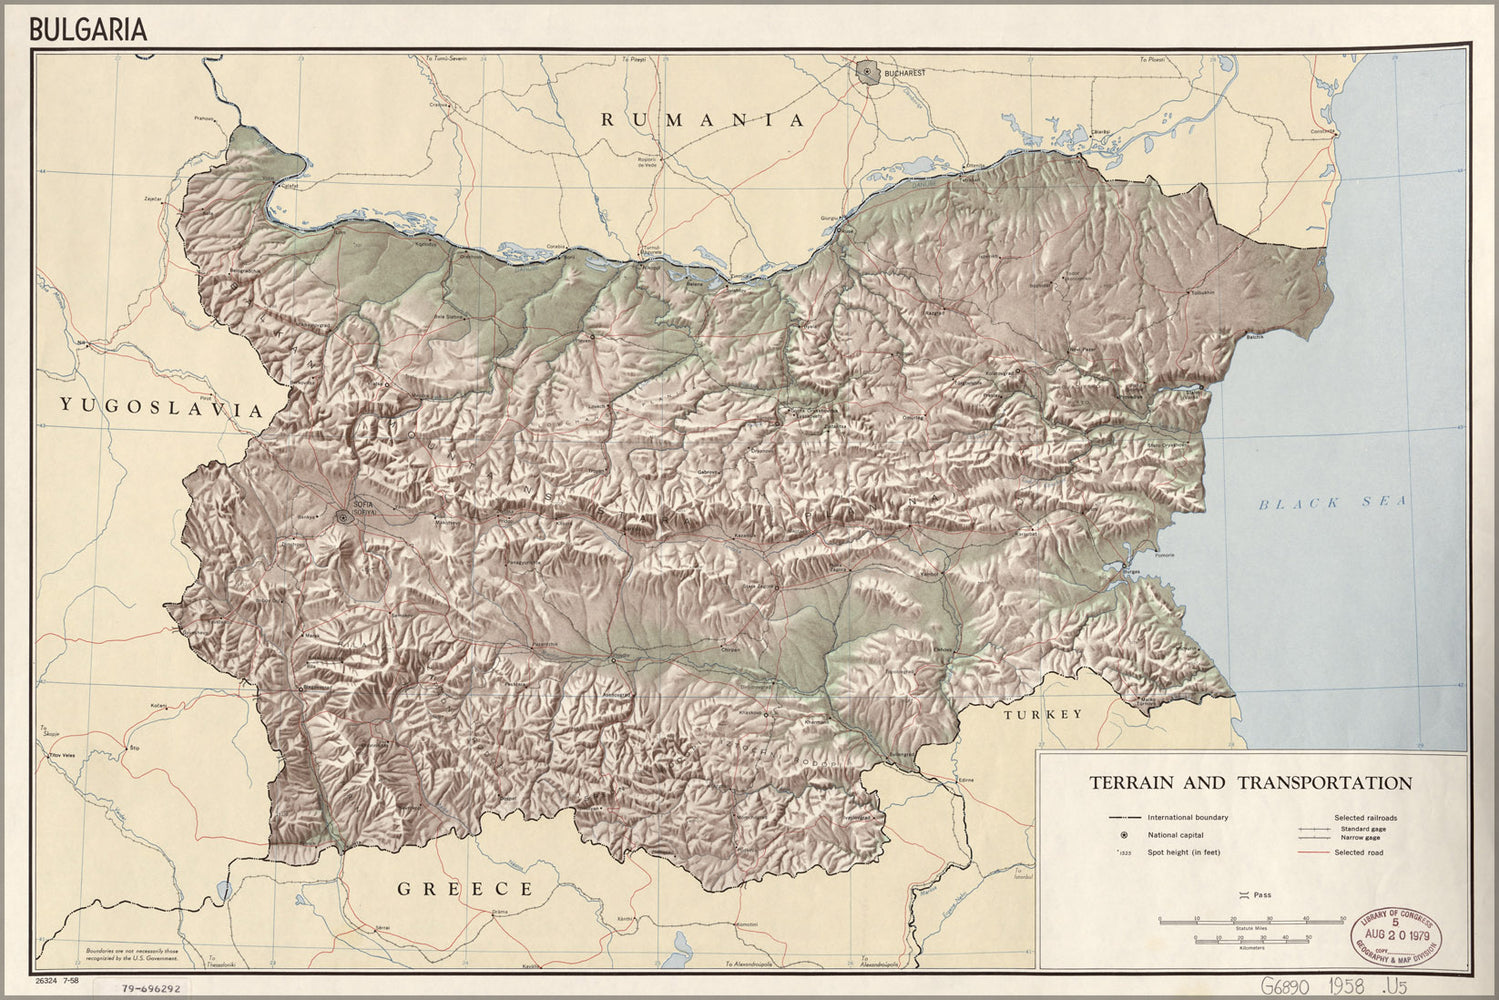 24"x36" Gallery Poster, cia map of Bulgaria 1958